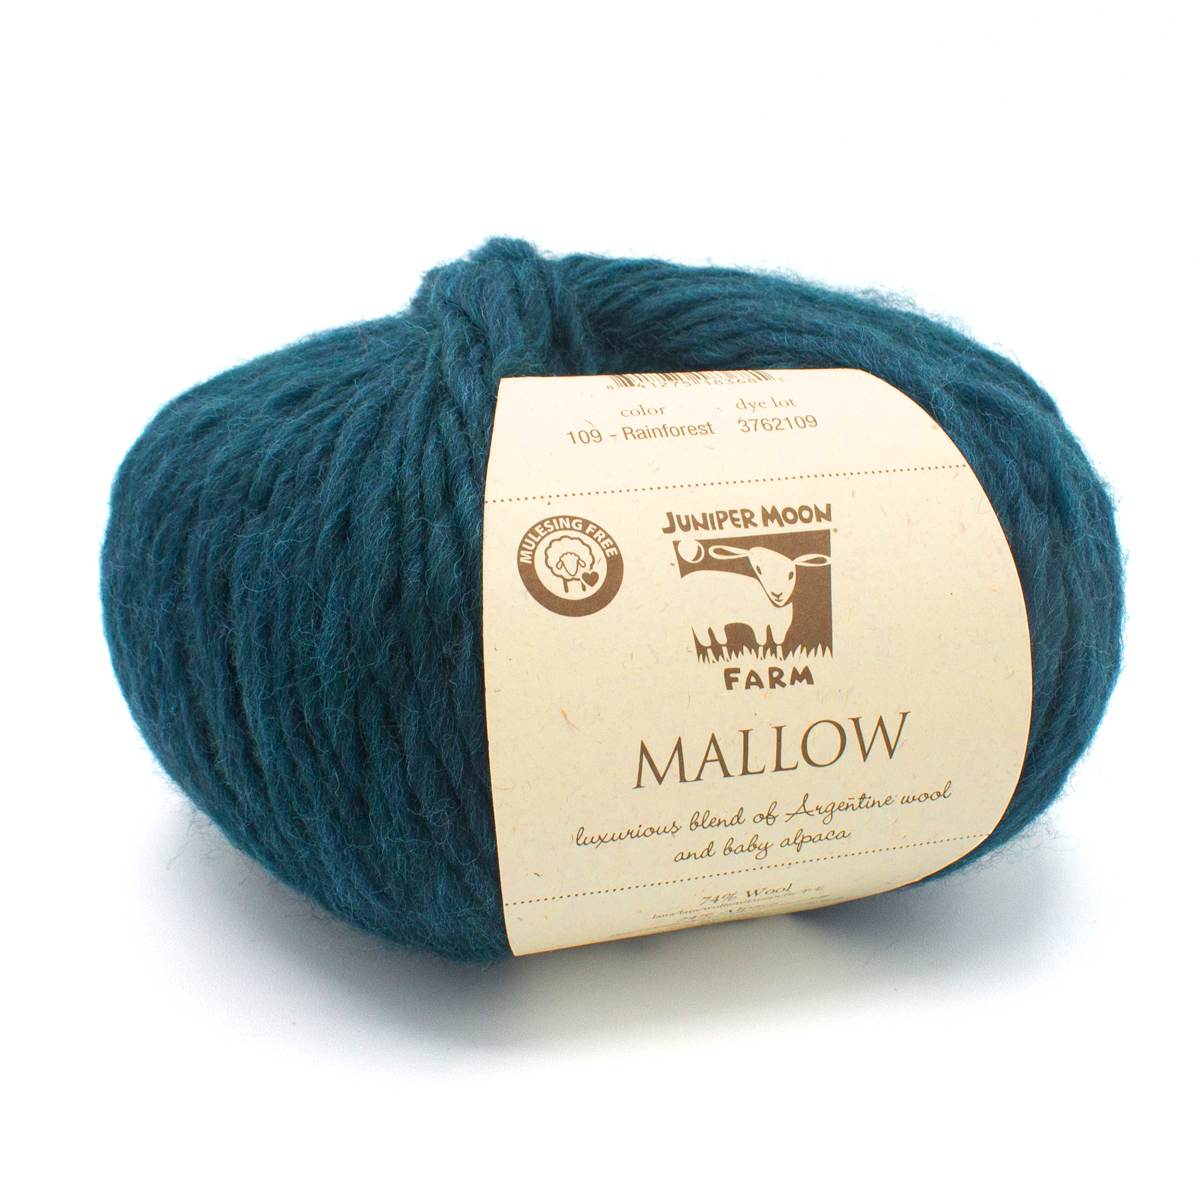 a skein of Mallow